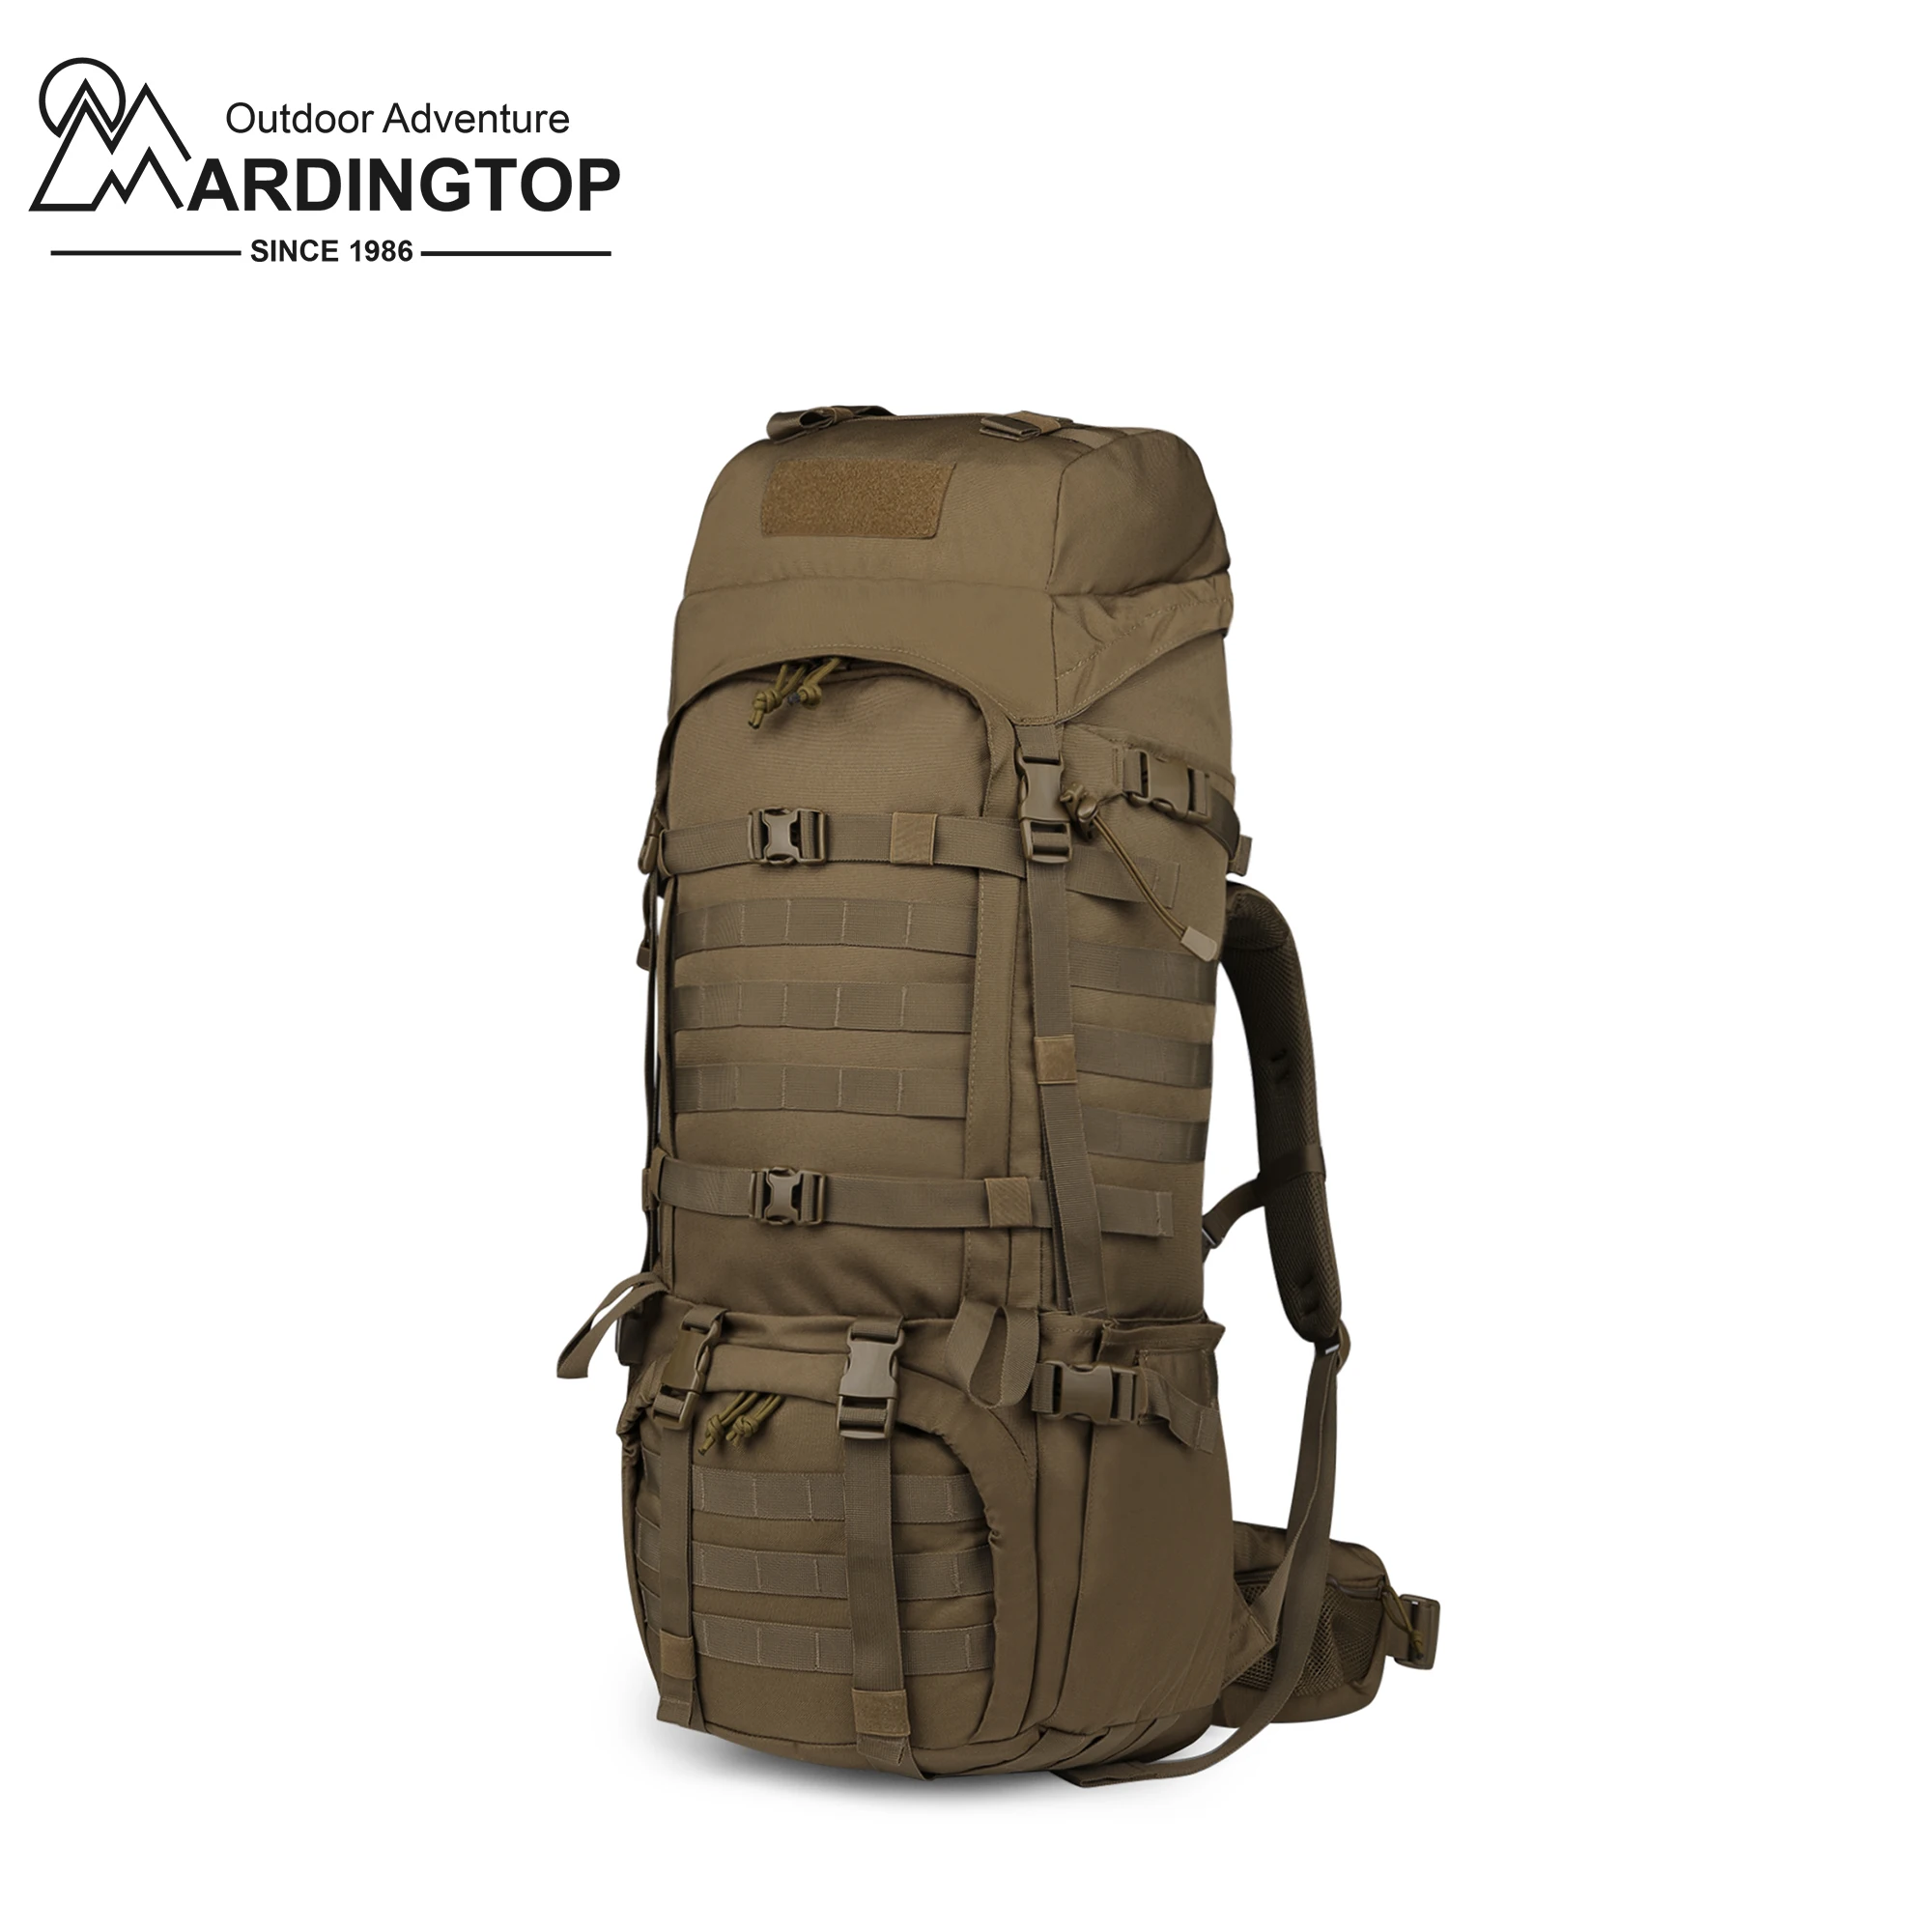 Mardingtop 65L Molle 600D Polyester Hiking Internal Frame Backpack with YKK Zippers and Rain Cover for Camping Military